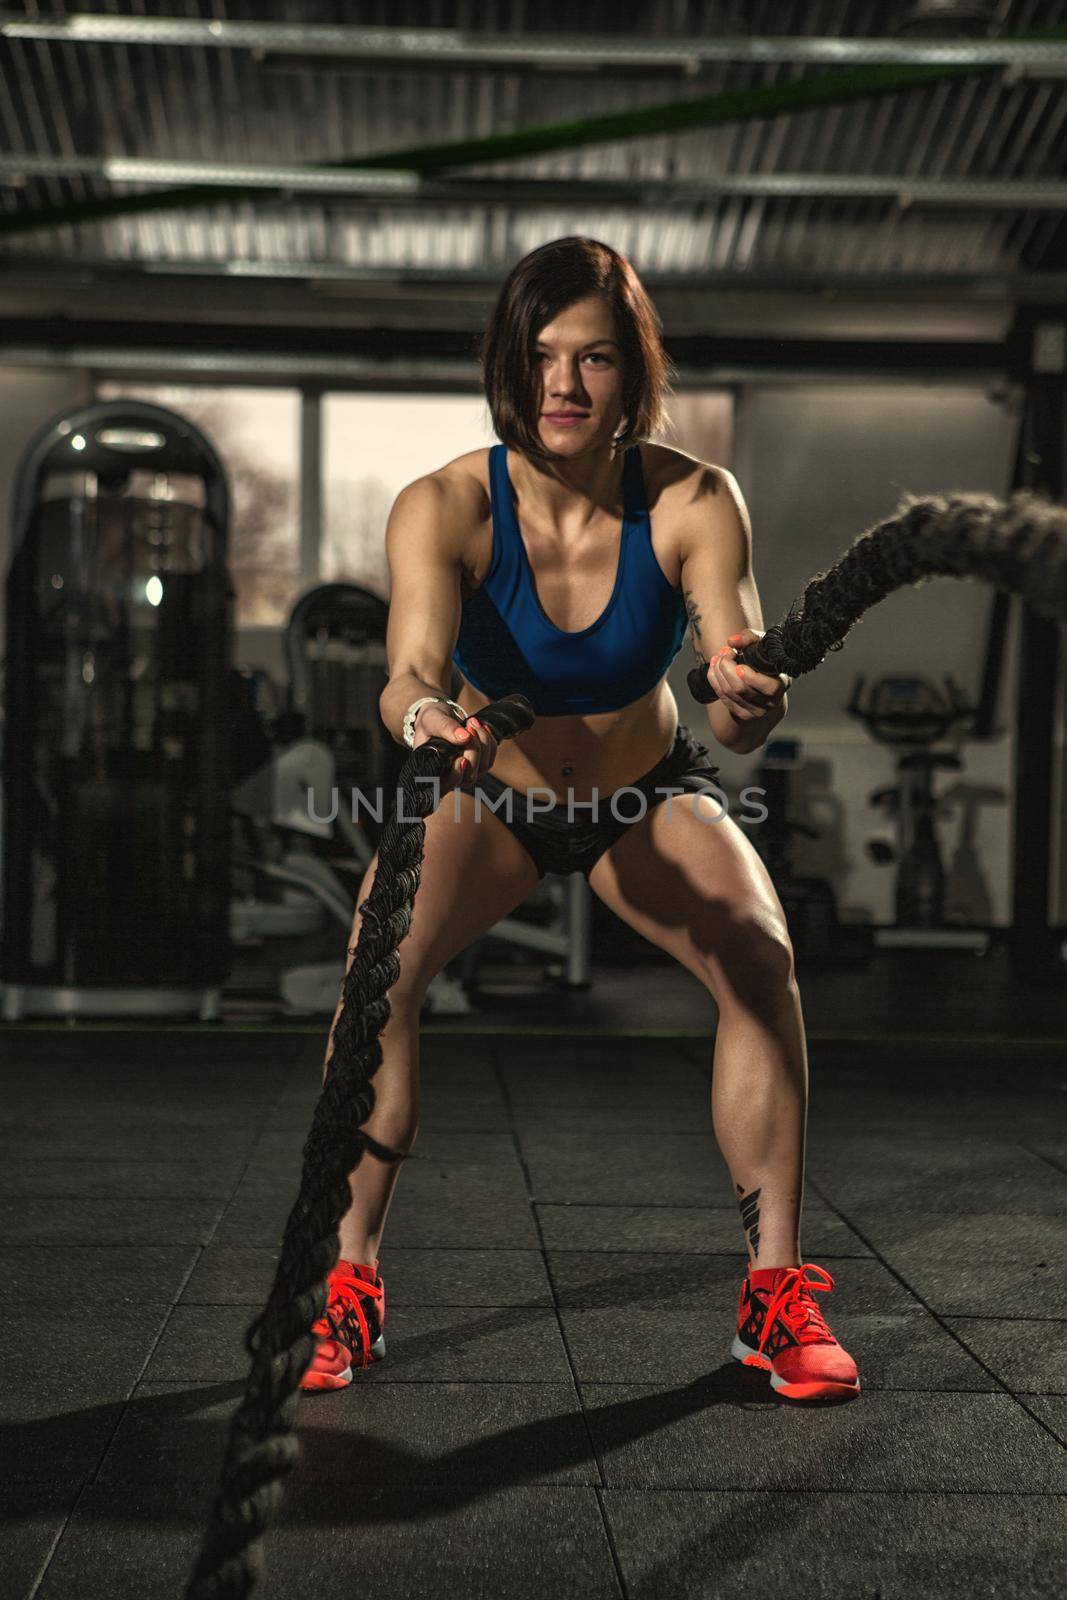 Crossfit workout. Vertical full length shot of an athletic fitness woman doing functional training exercise with battle ropes at the gym CrossFit cross training strength endurance energy power concept